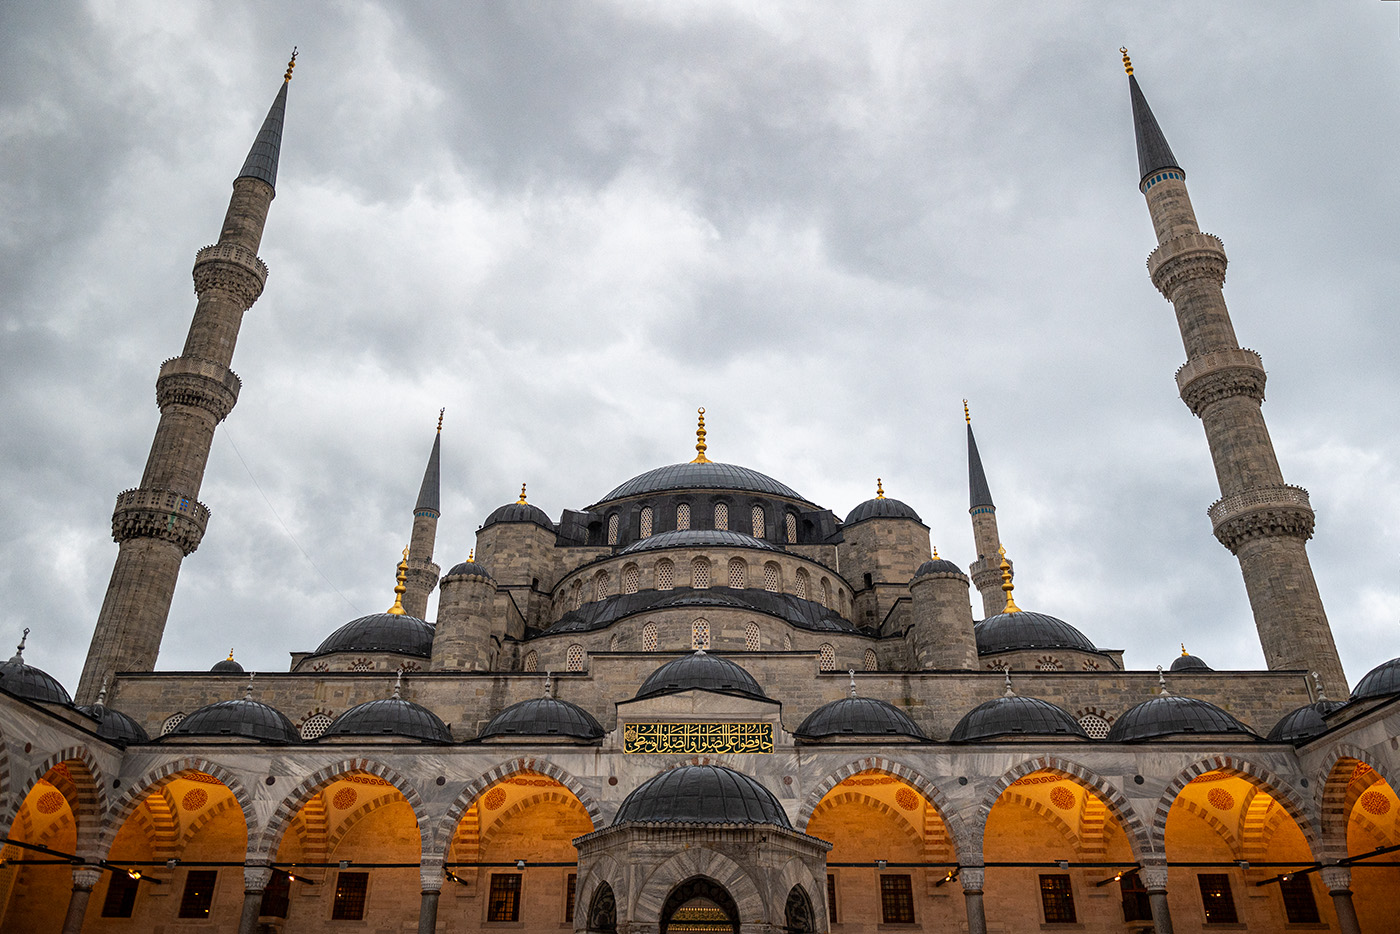 Blue Mosque from the exterior against a cloudy afternoon